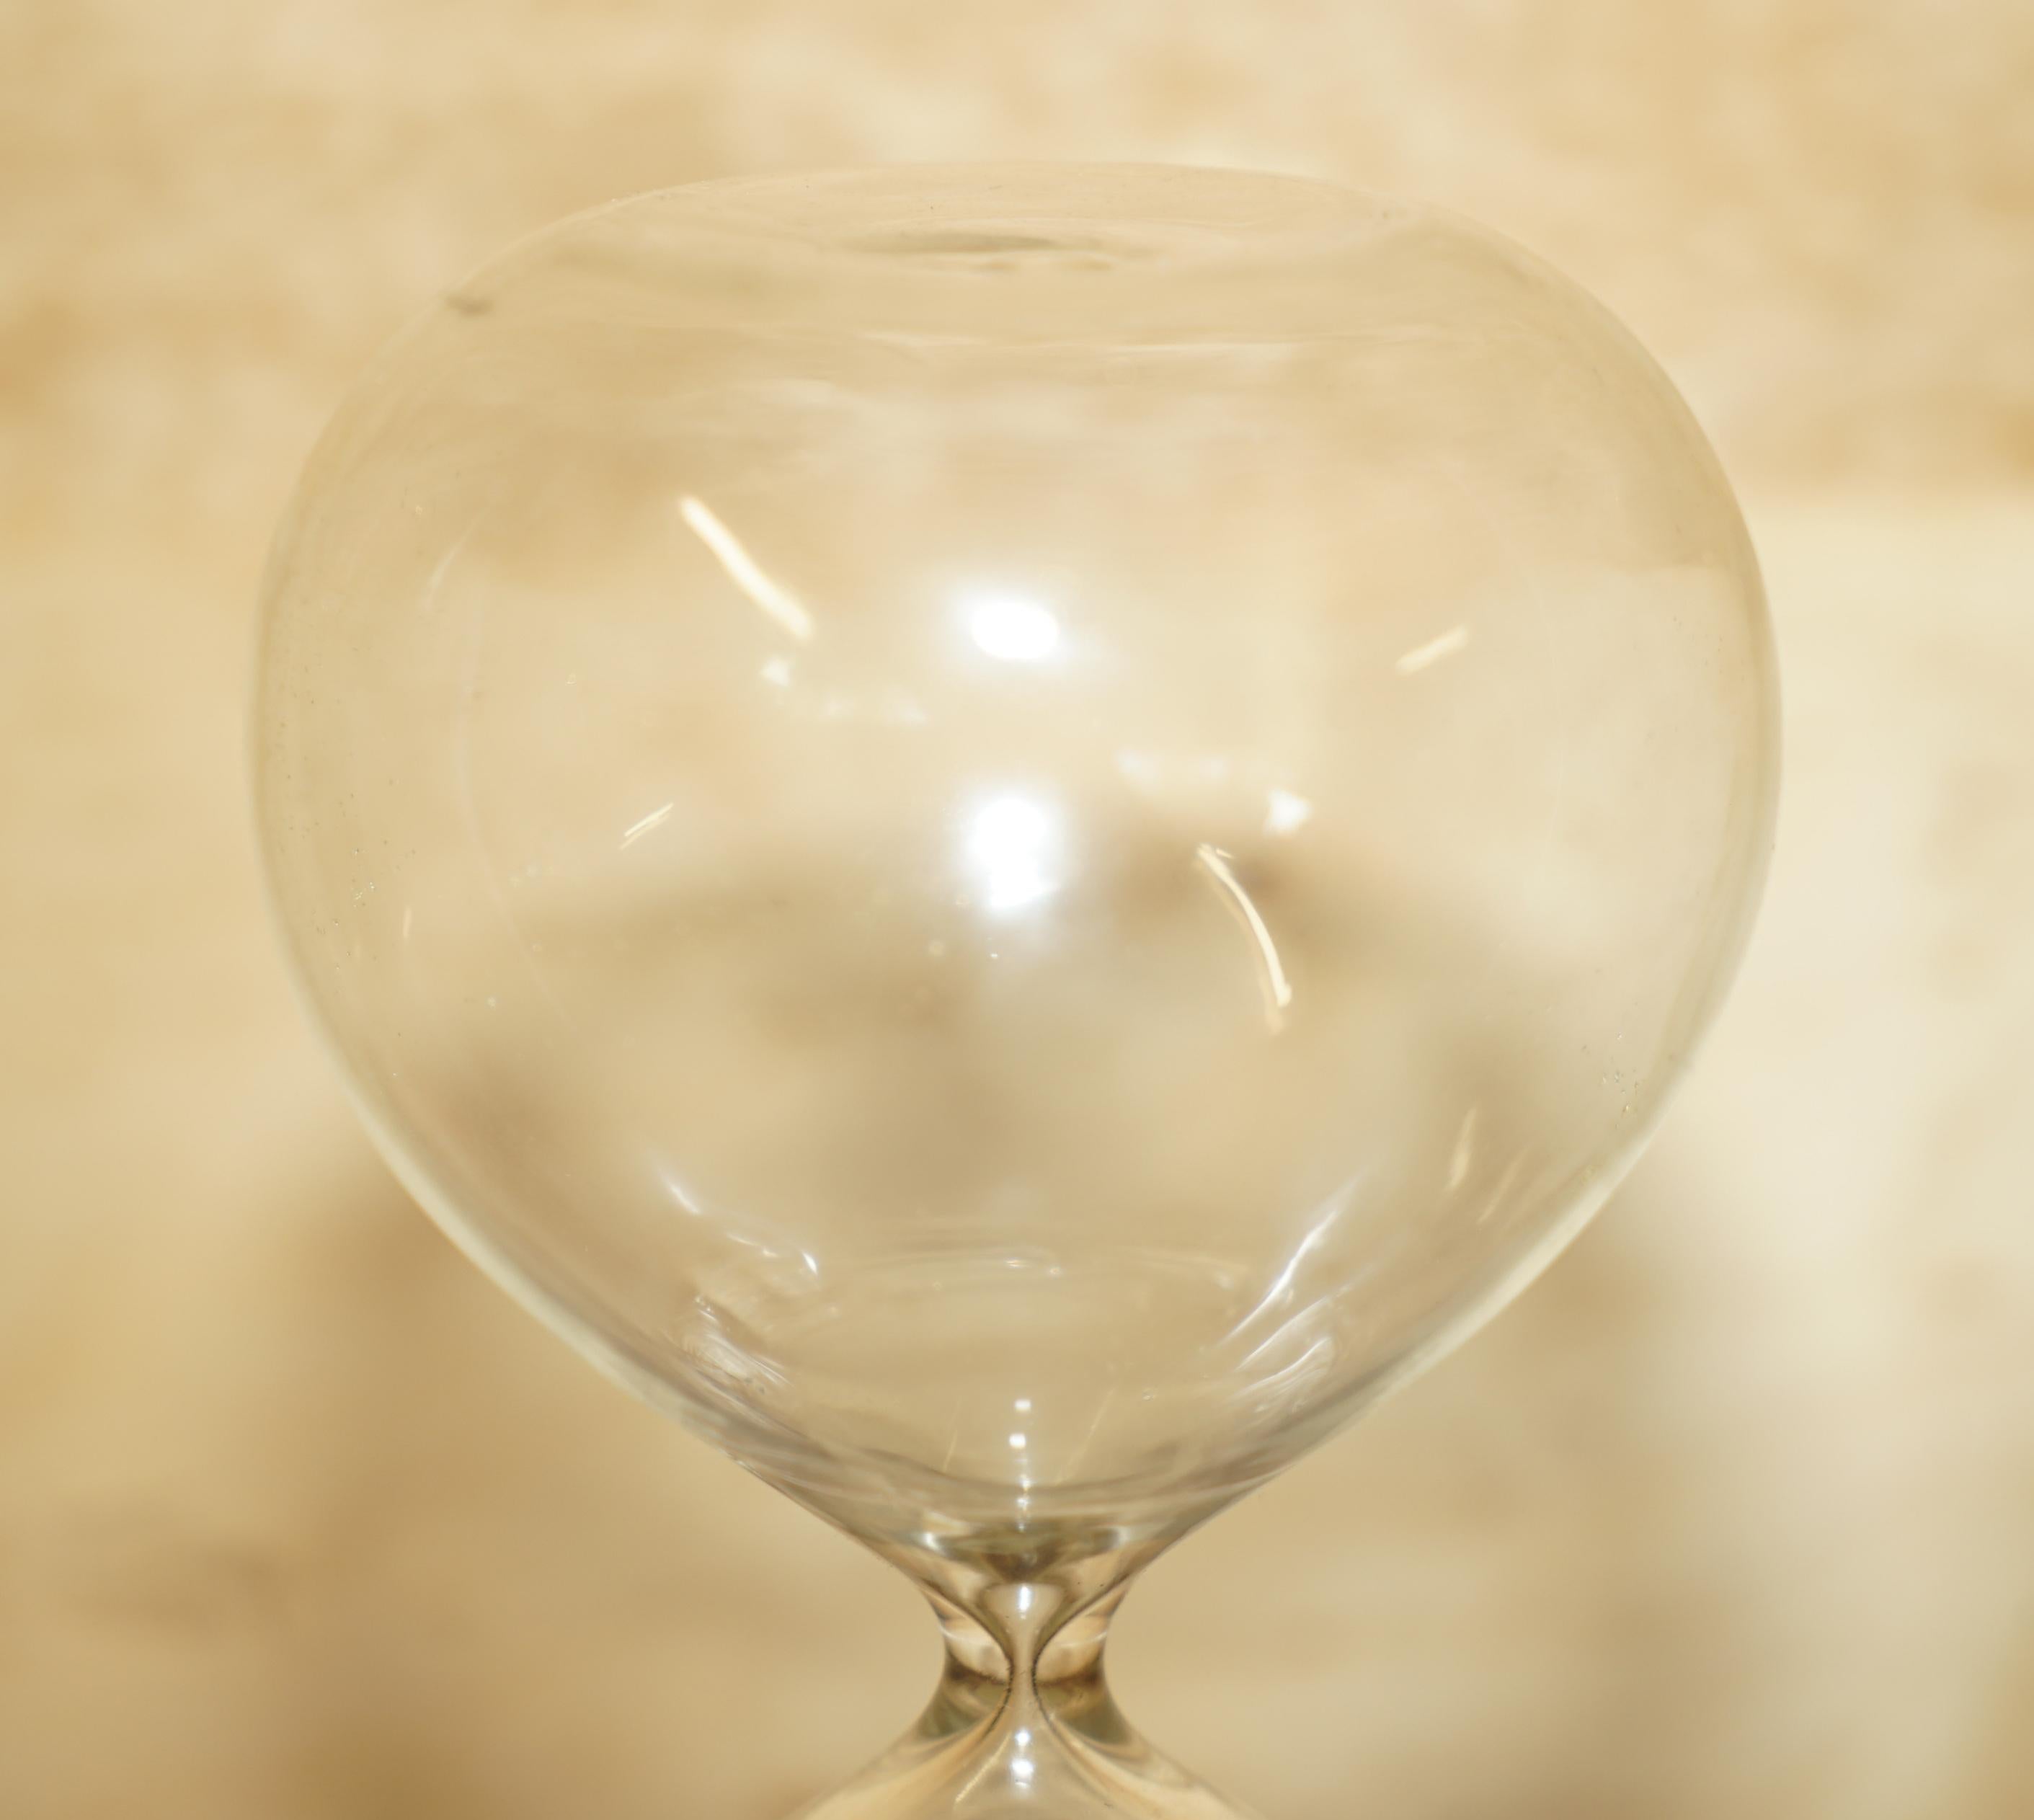 We are delighted to offer for sale this lovely vintage hourglass sand timer

A very decorative and well made thing, I’m not sure on the age but it looks old

The condition is perfect so far as I can see

Dimensions

Height:-